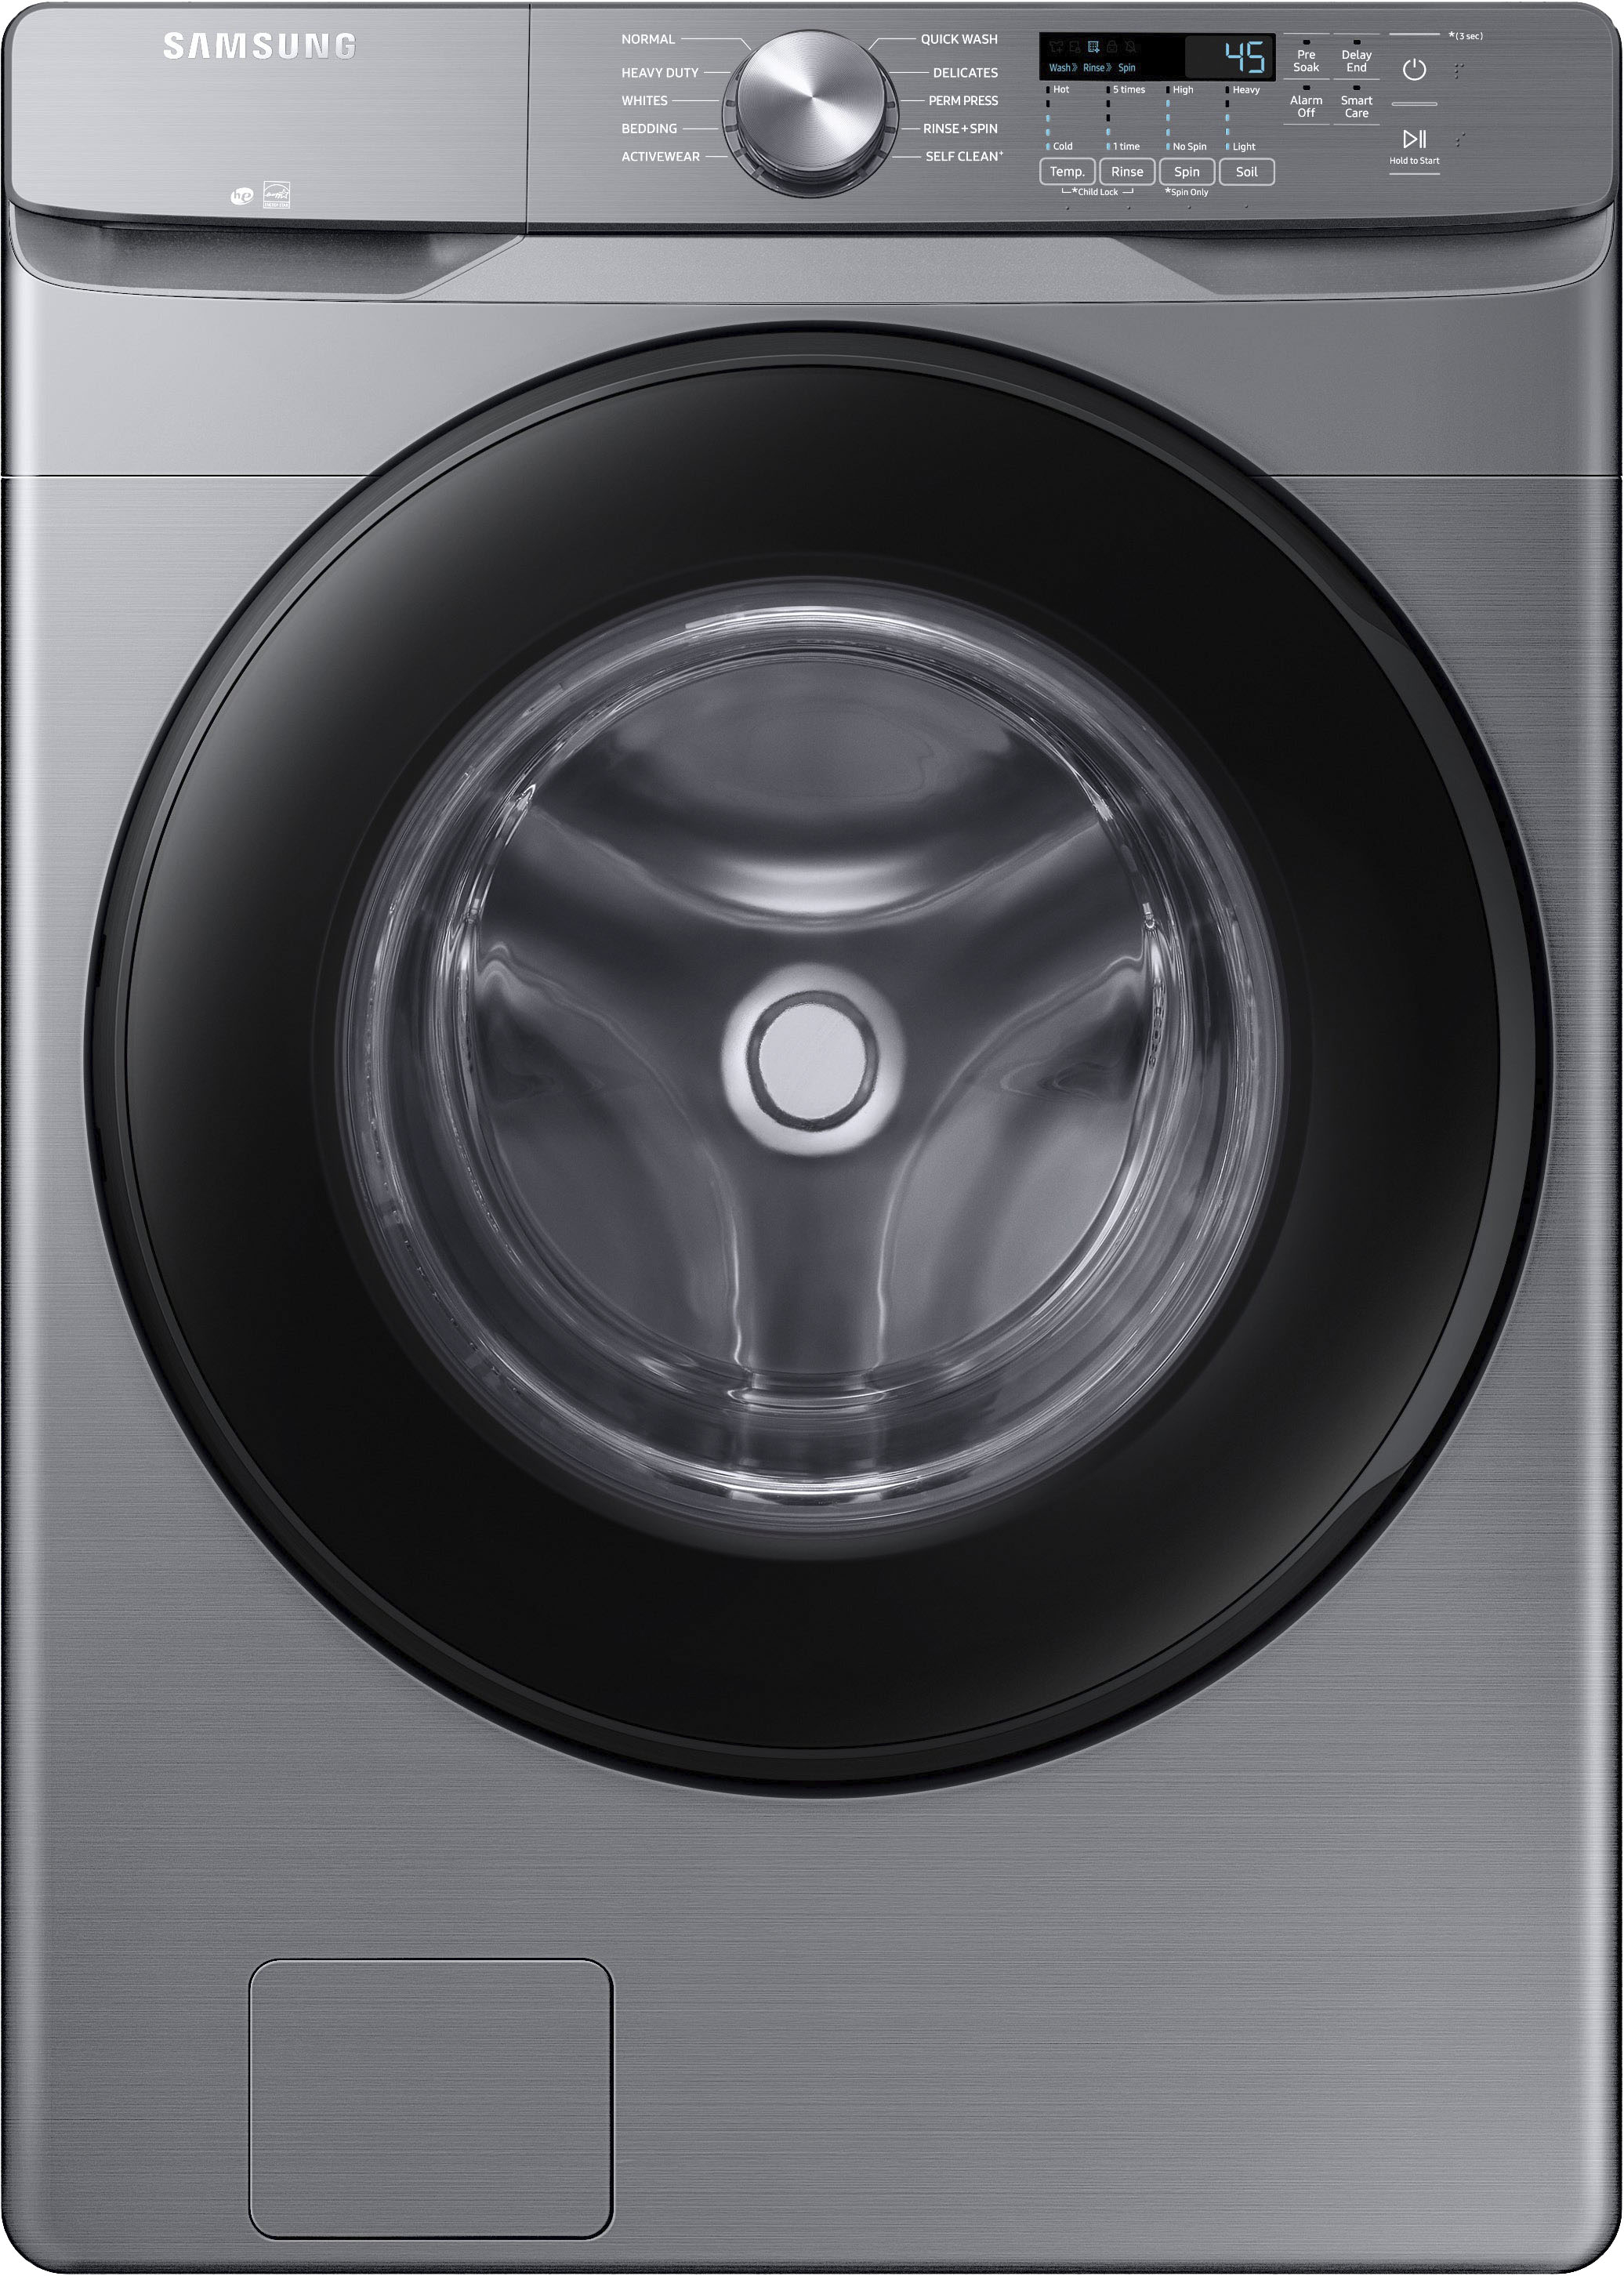 Samsung - 4.5 cu. ft. Front Load Washer with Vibration Reduction Technology+ - Platinum